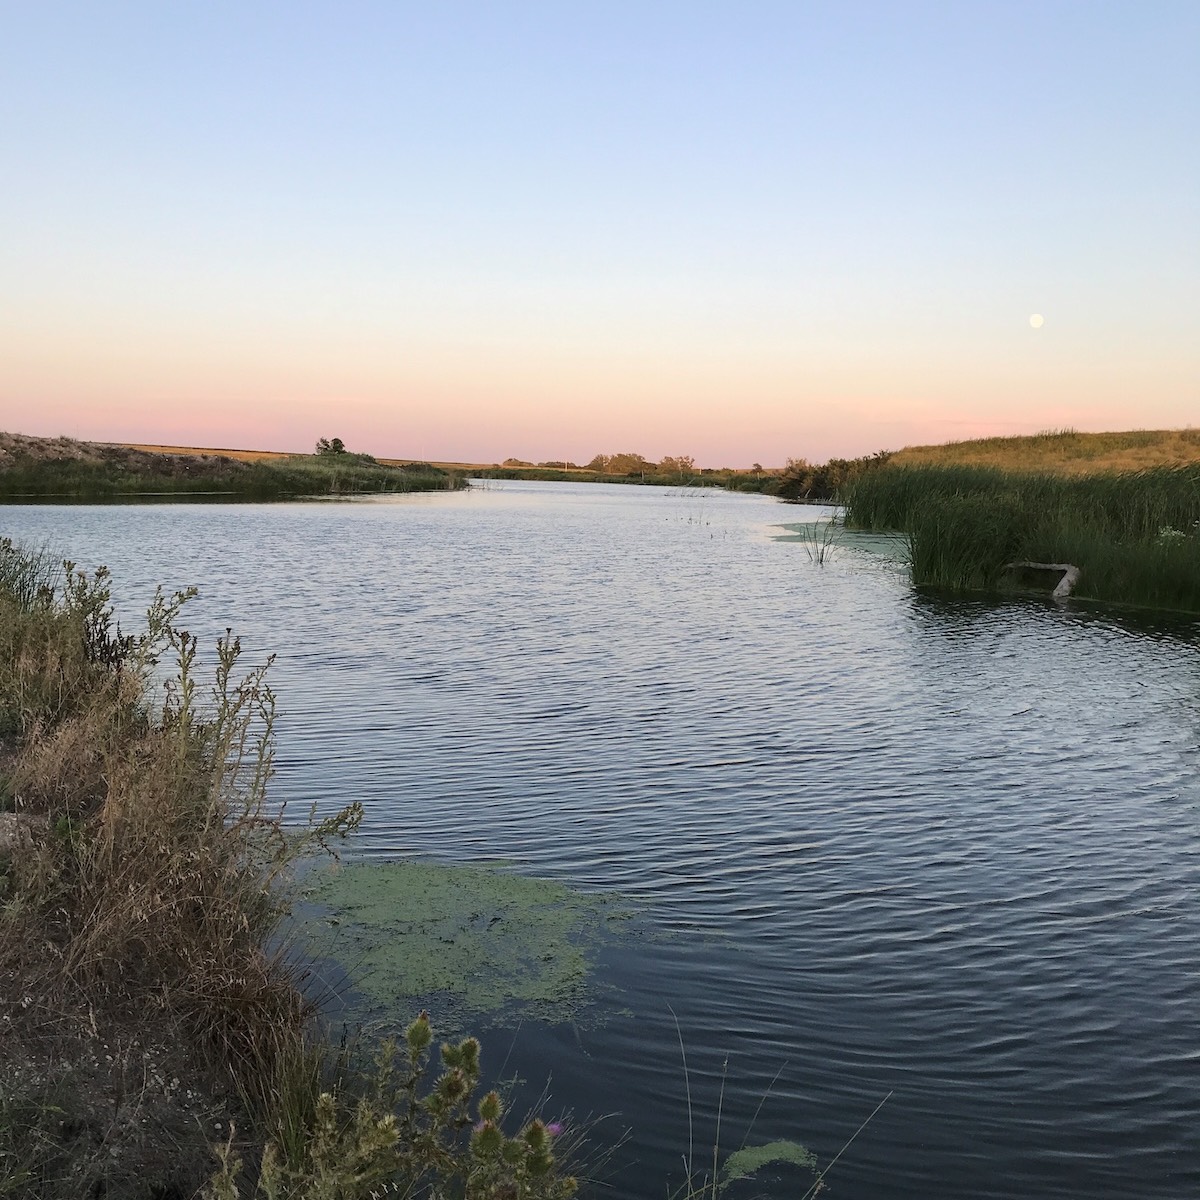 A pond at sunset, with a sky getting pink on the horizon, and a small full moon. The water ripples toward the camera, and thistles and other plants grow on the banks.